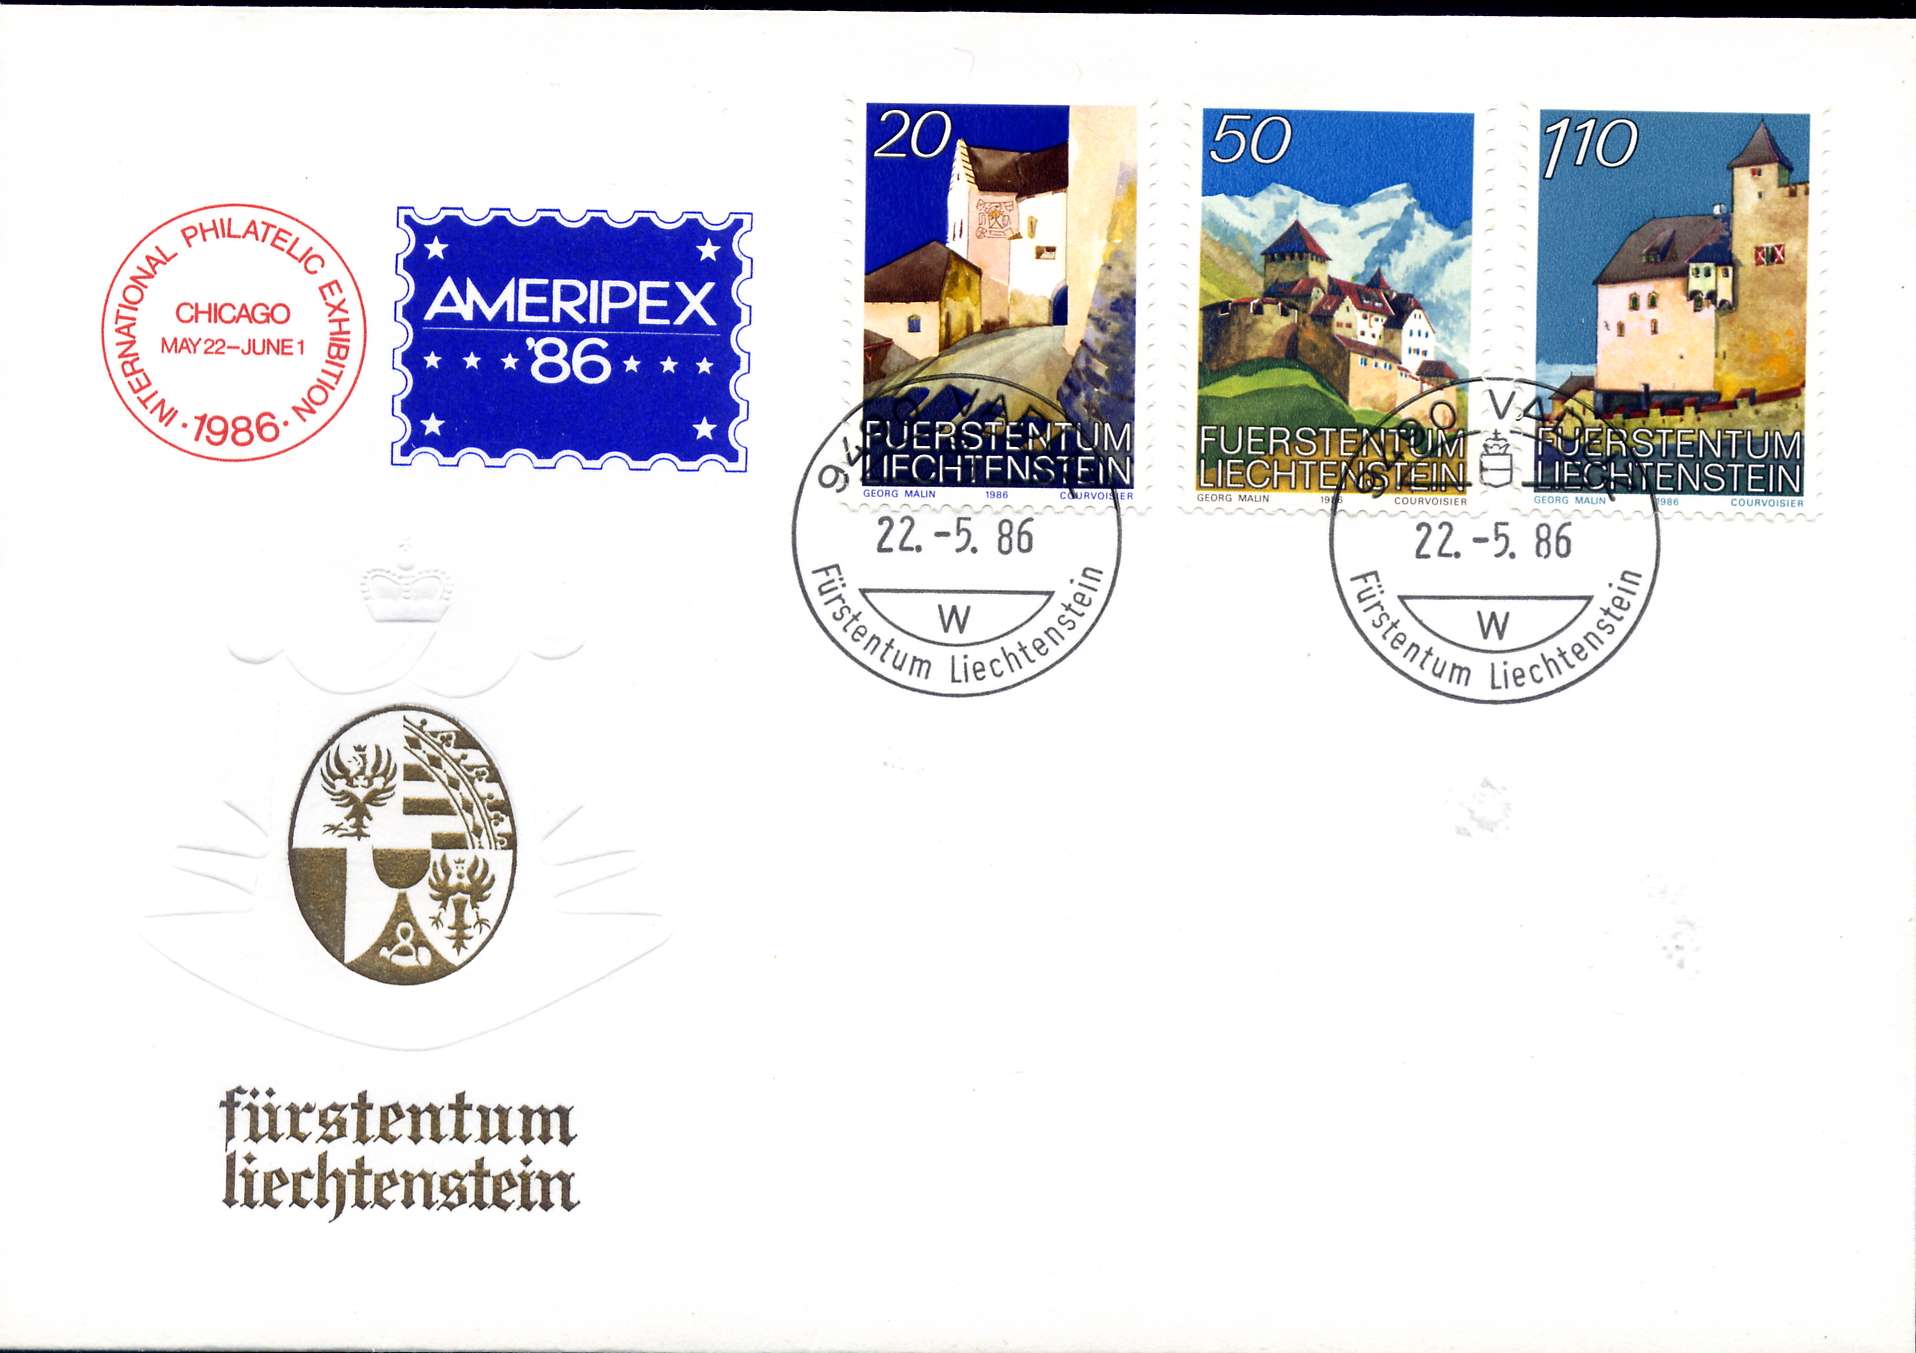 https://swiss-stamps.org/wp-content/uploads/2023/12/1986-5-Chicago.jpg